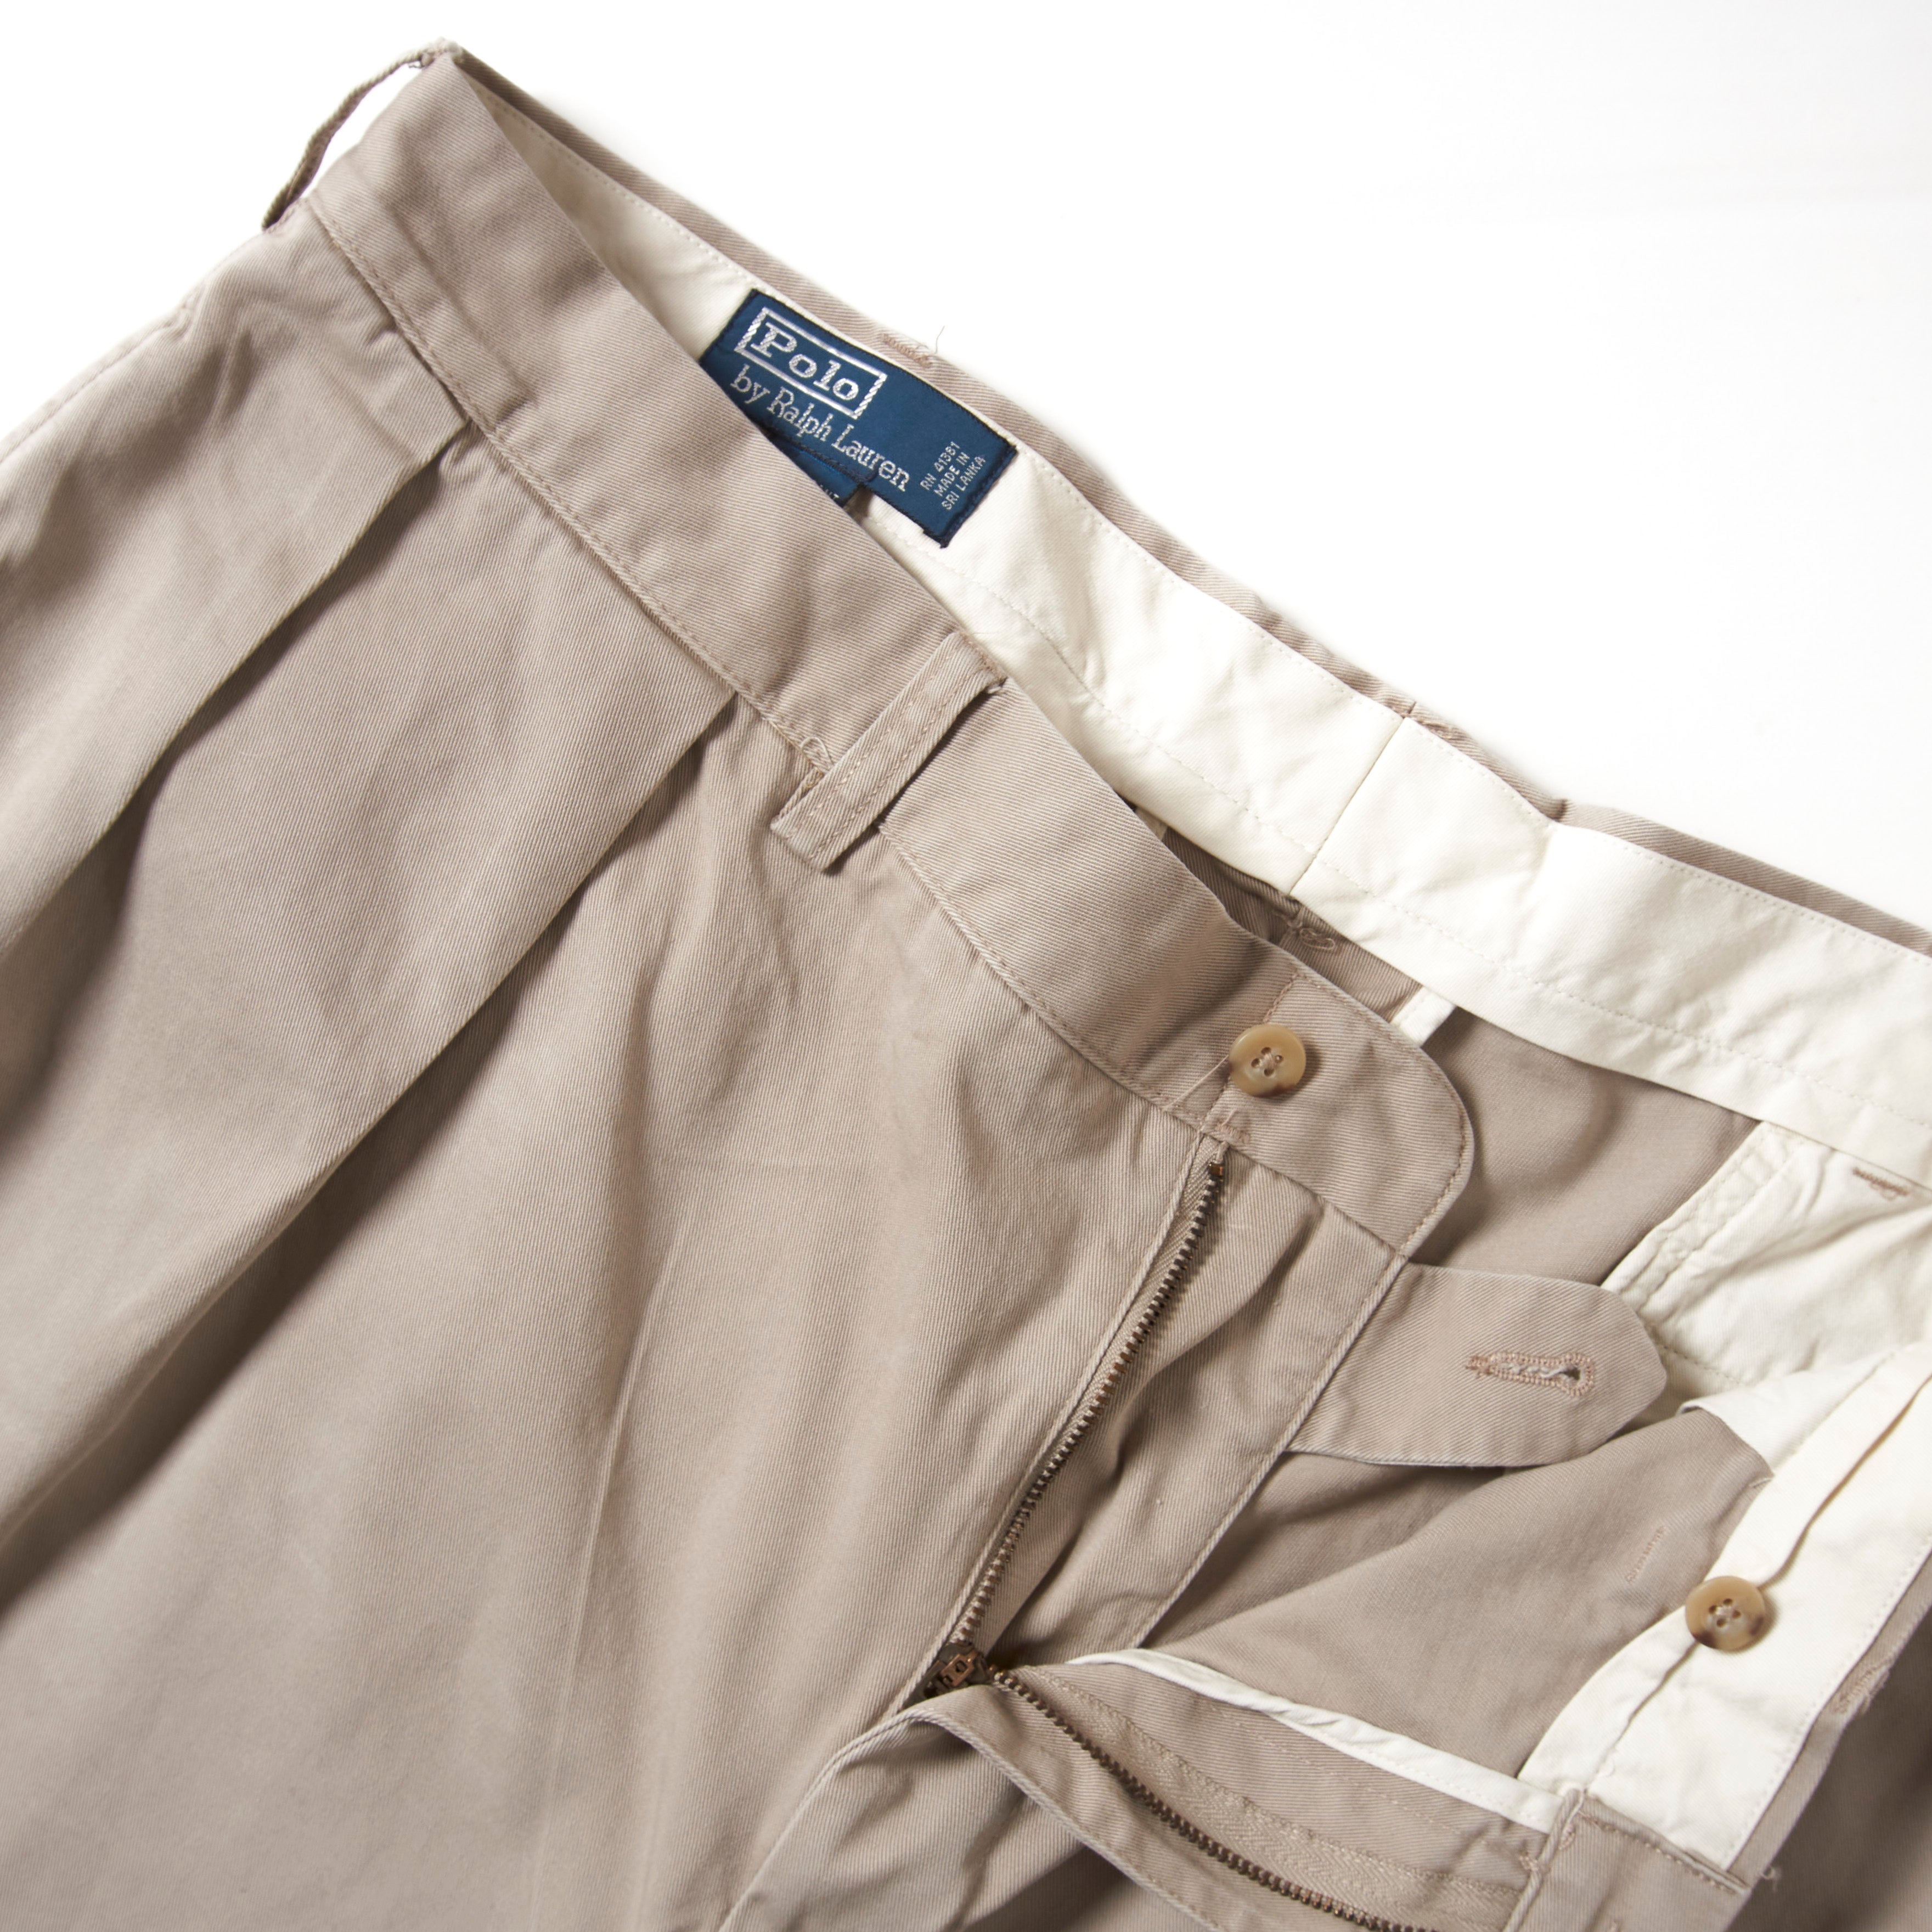 Vintage Polo By Ralph Lauren Andrew Pants 42x30 – Stax